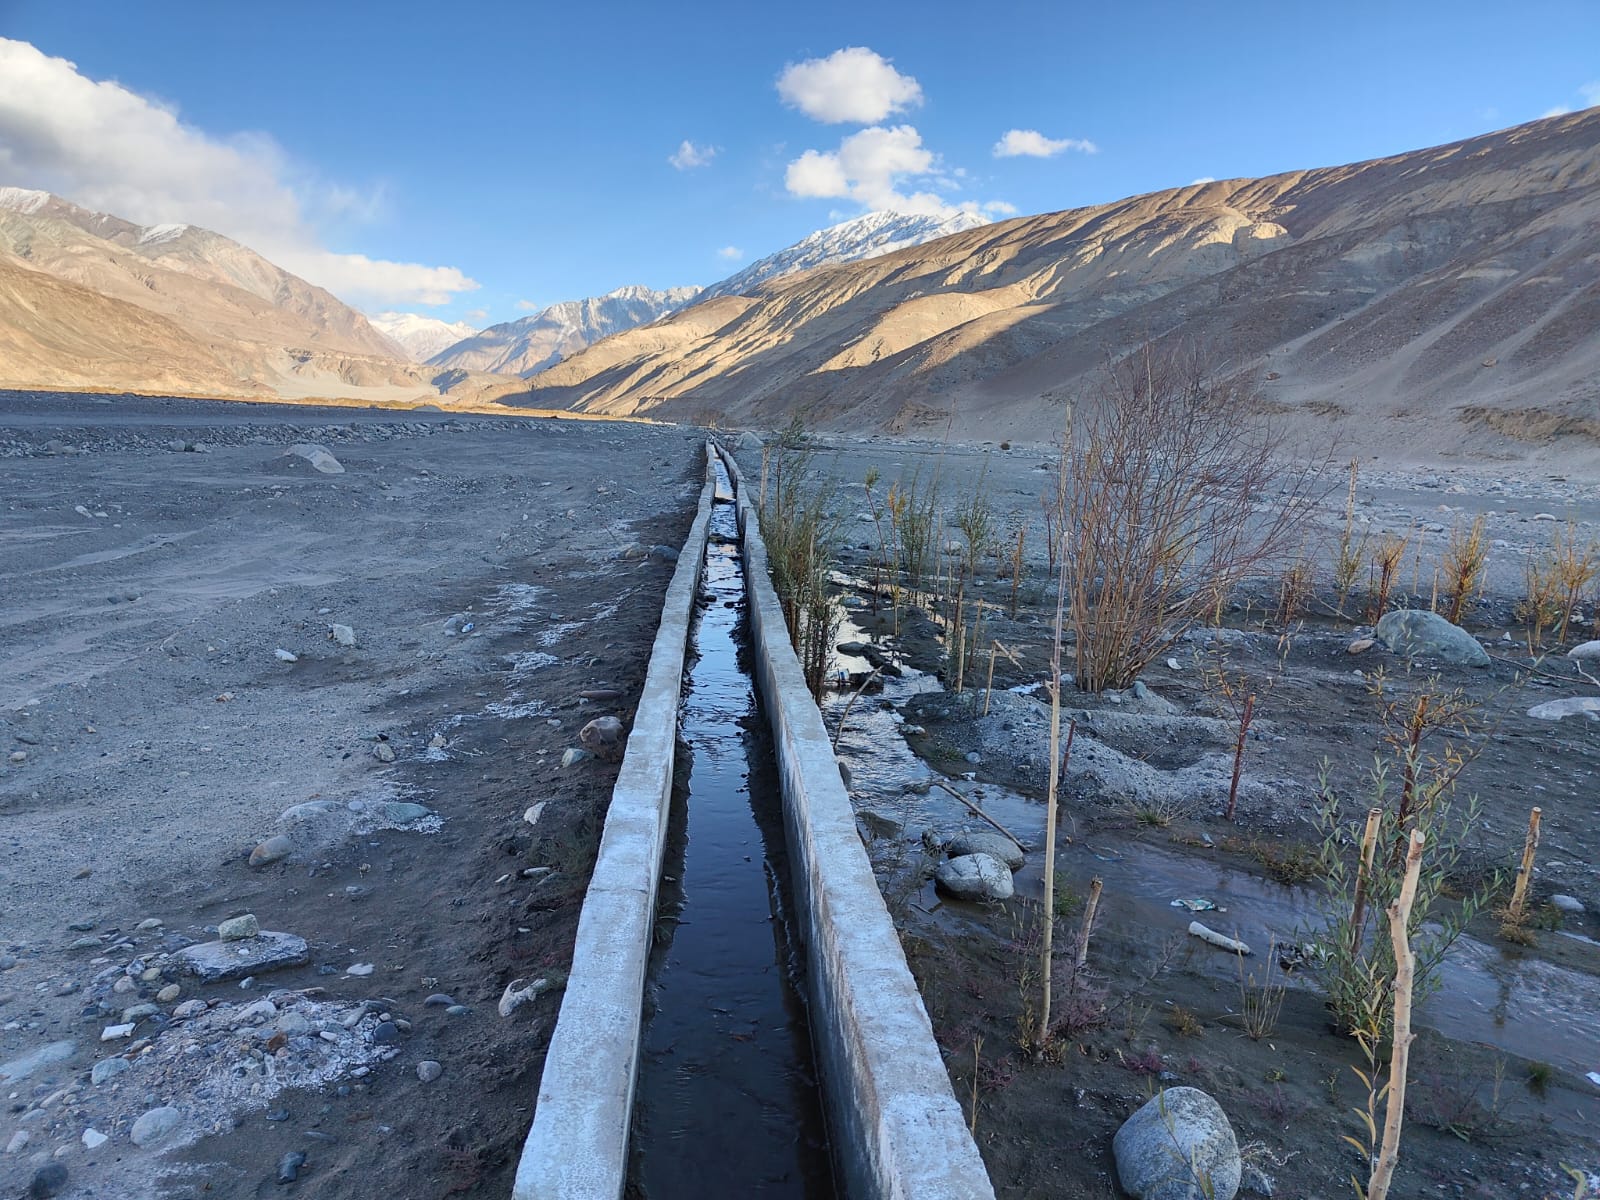 Proposed site at  Nubra Valley